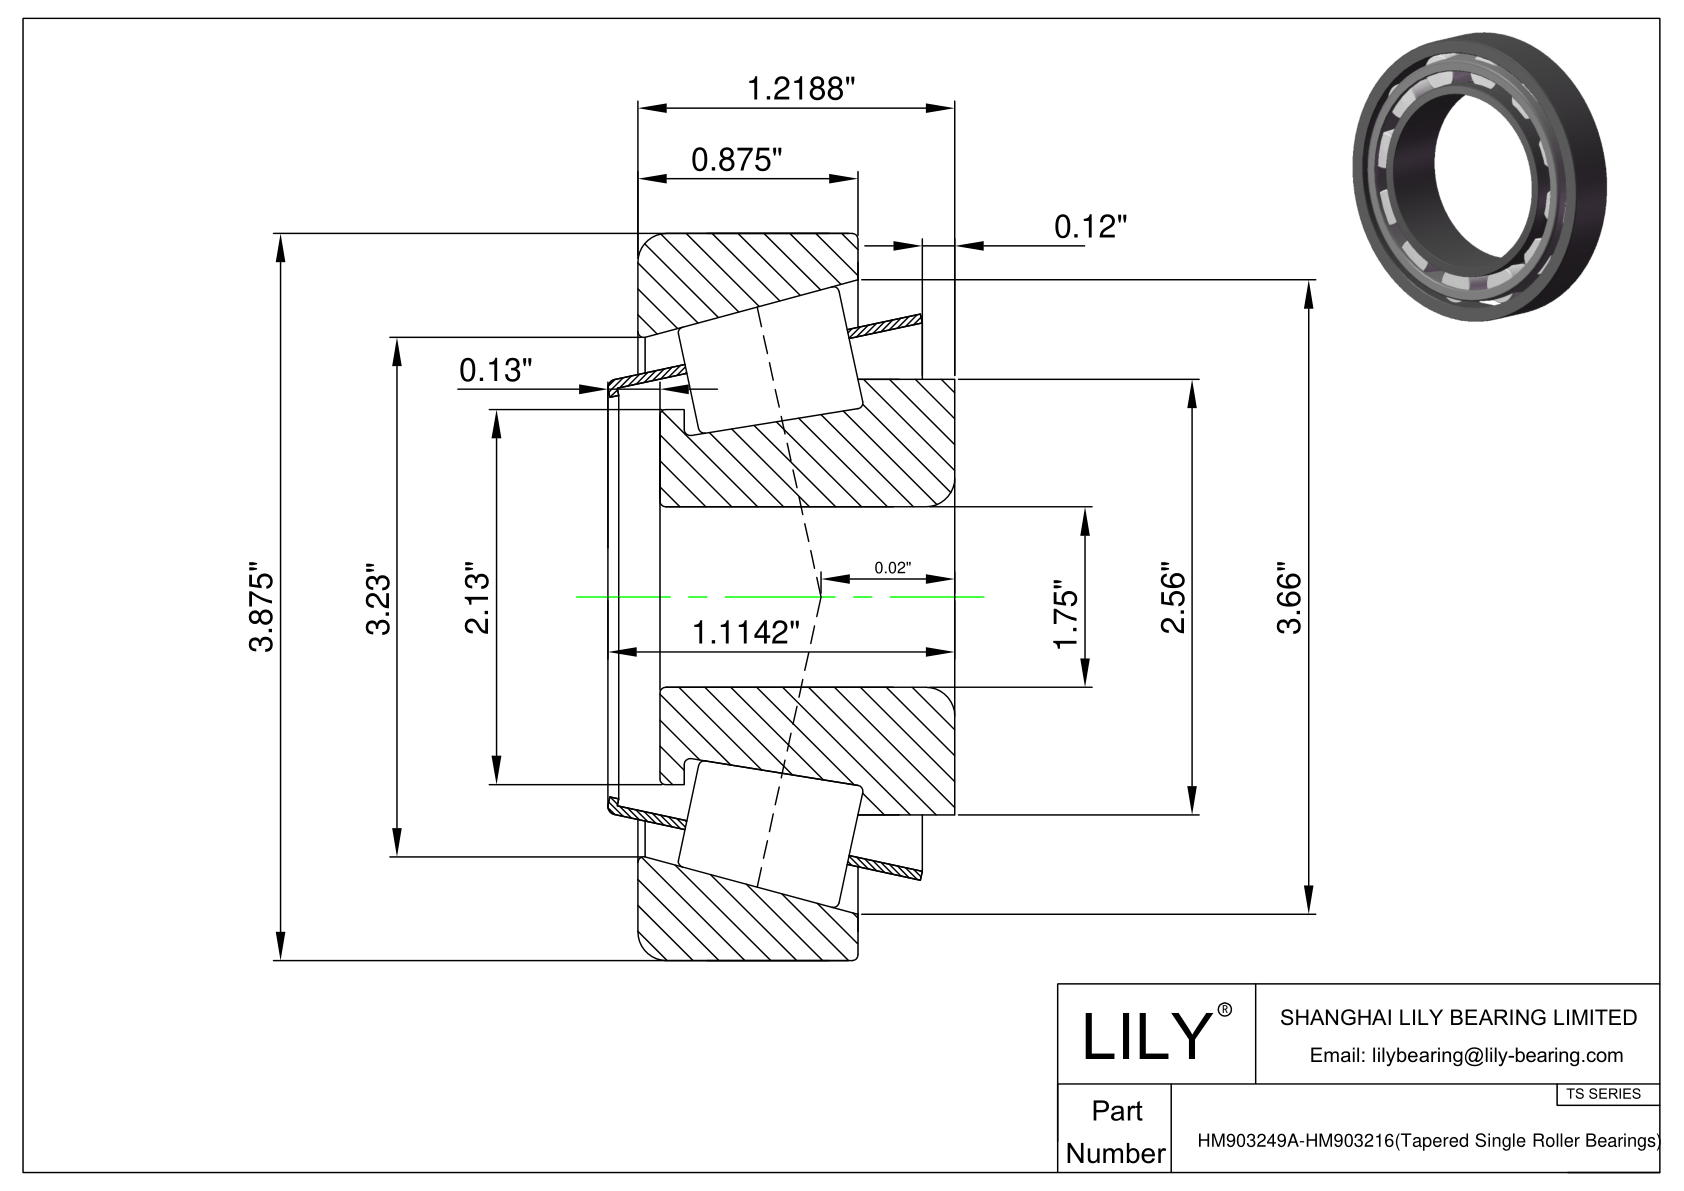 HM903249A-HM903216 TS (Tapered Single Roller Bearings) (Imperial) cad drawing